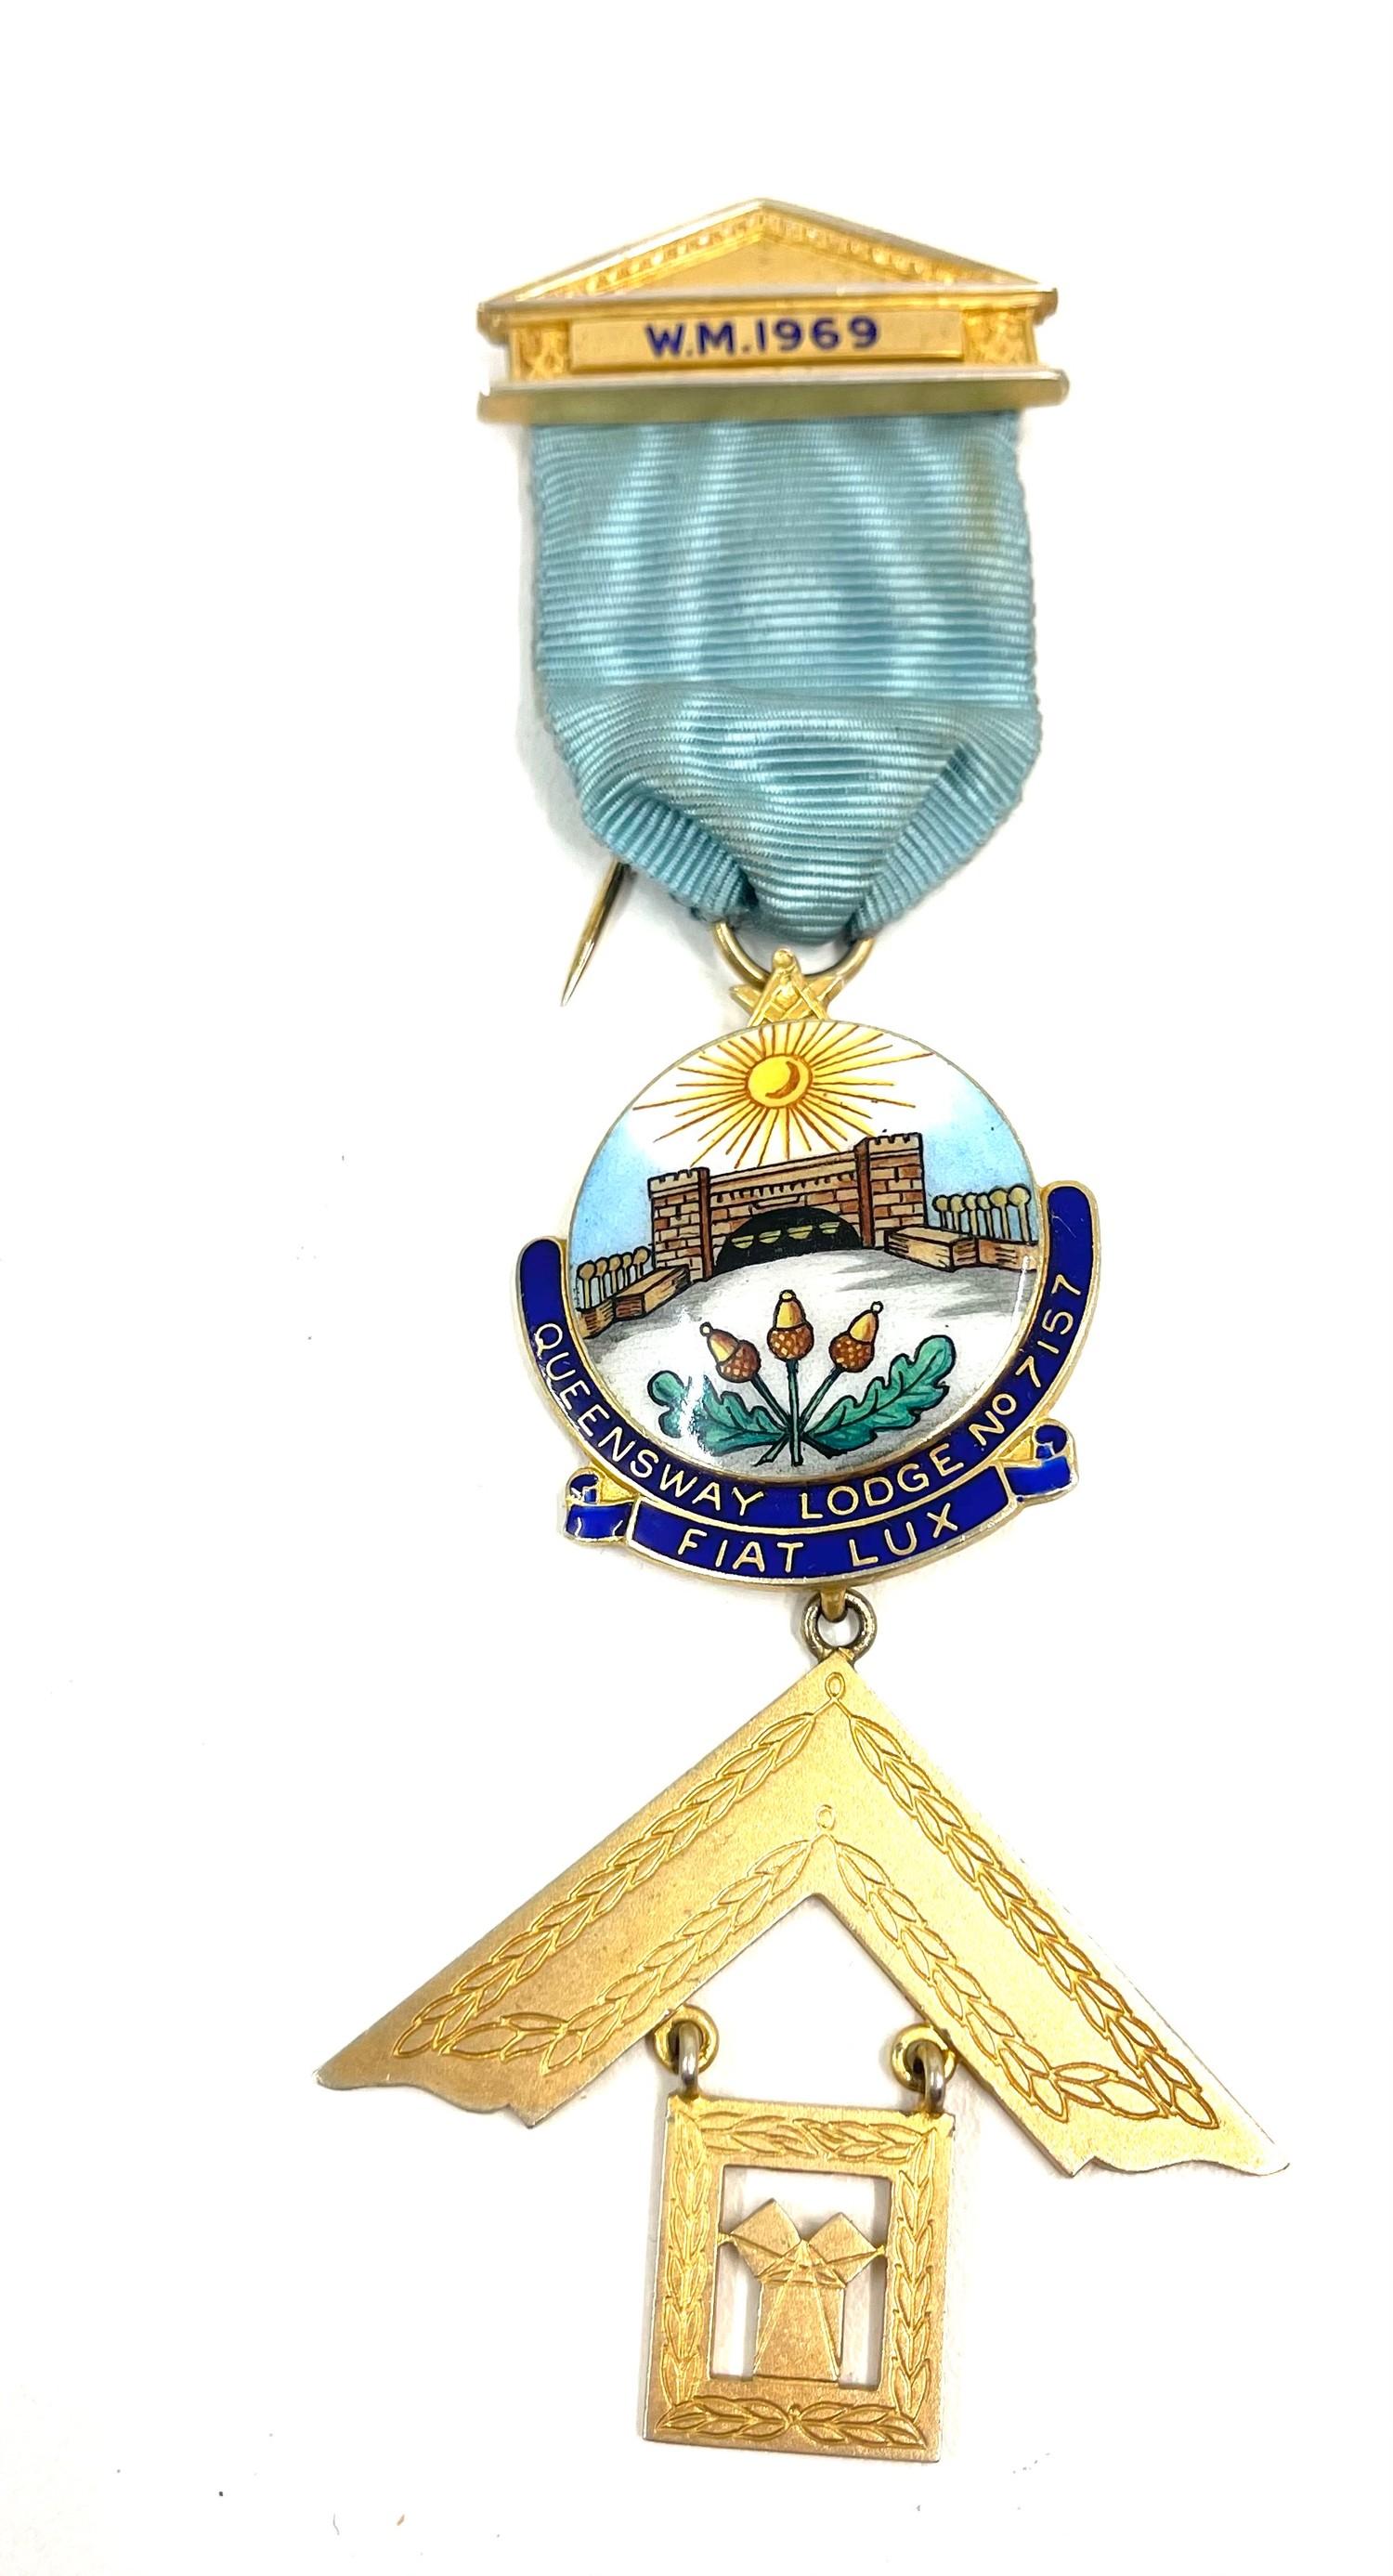 Boxed hallmarked silver and enamel masonic lodge jewel, Queensway Lodge 7157 - Image 2 of 3